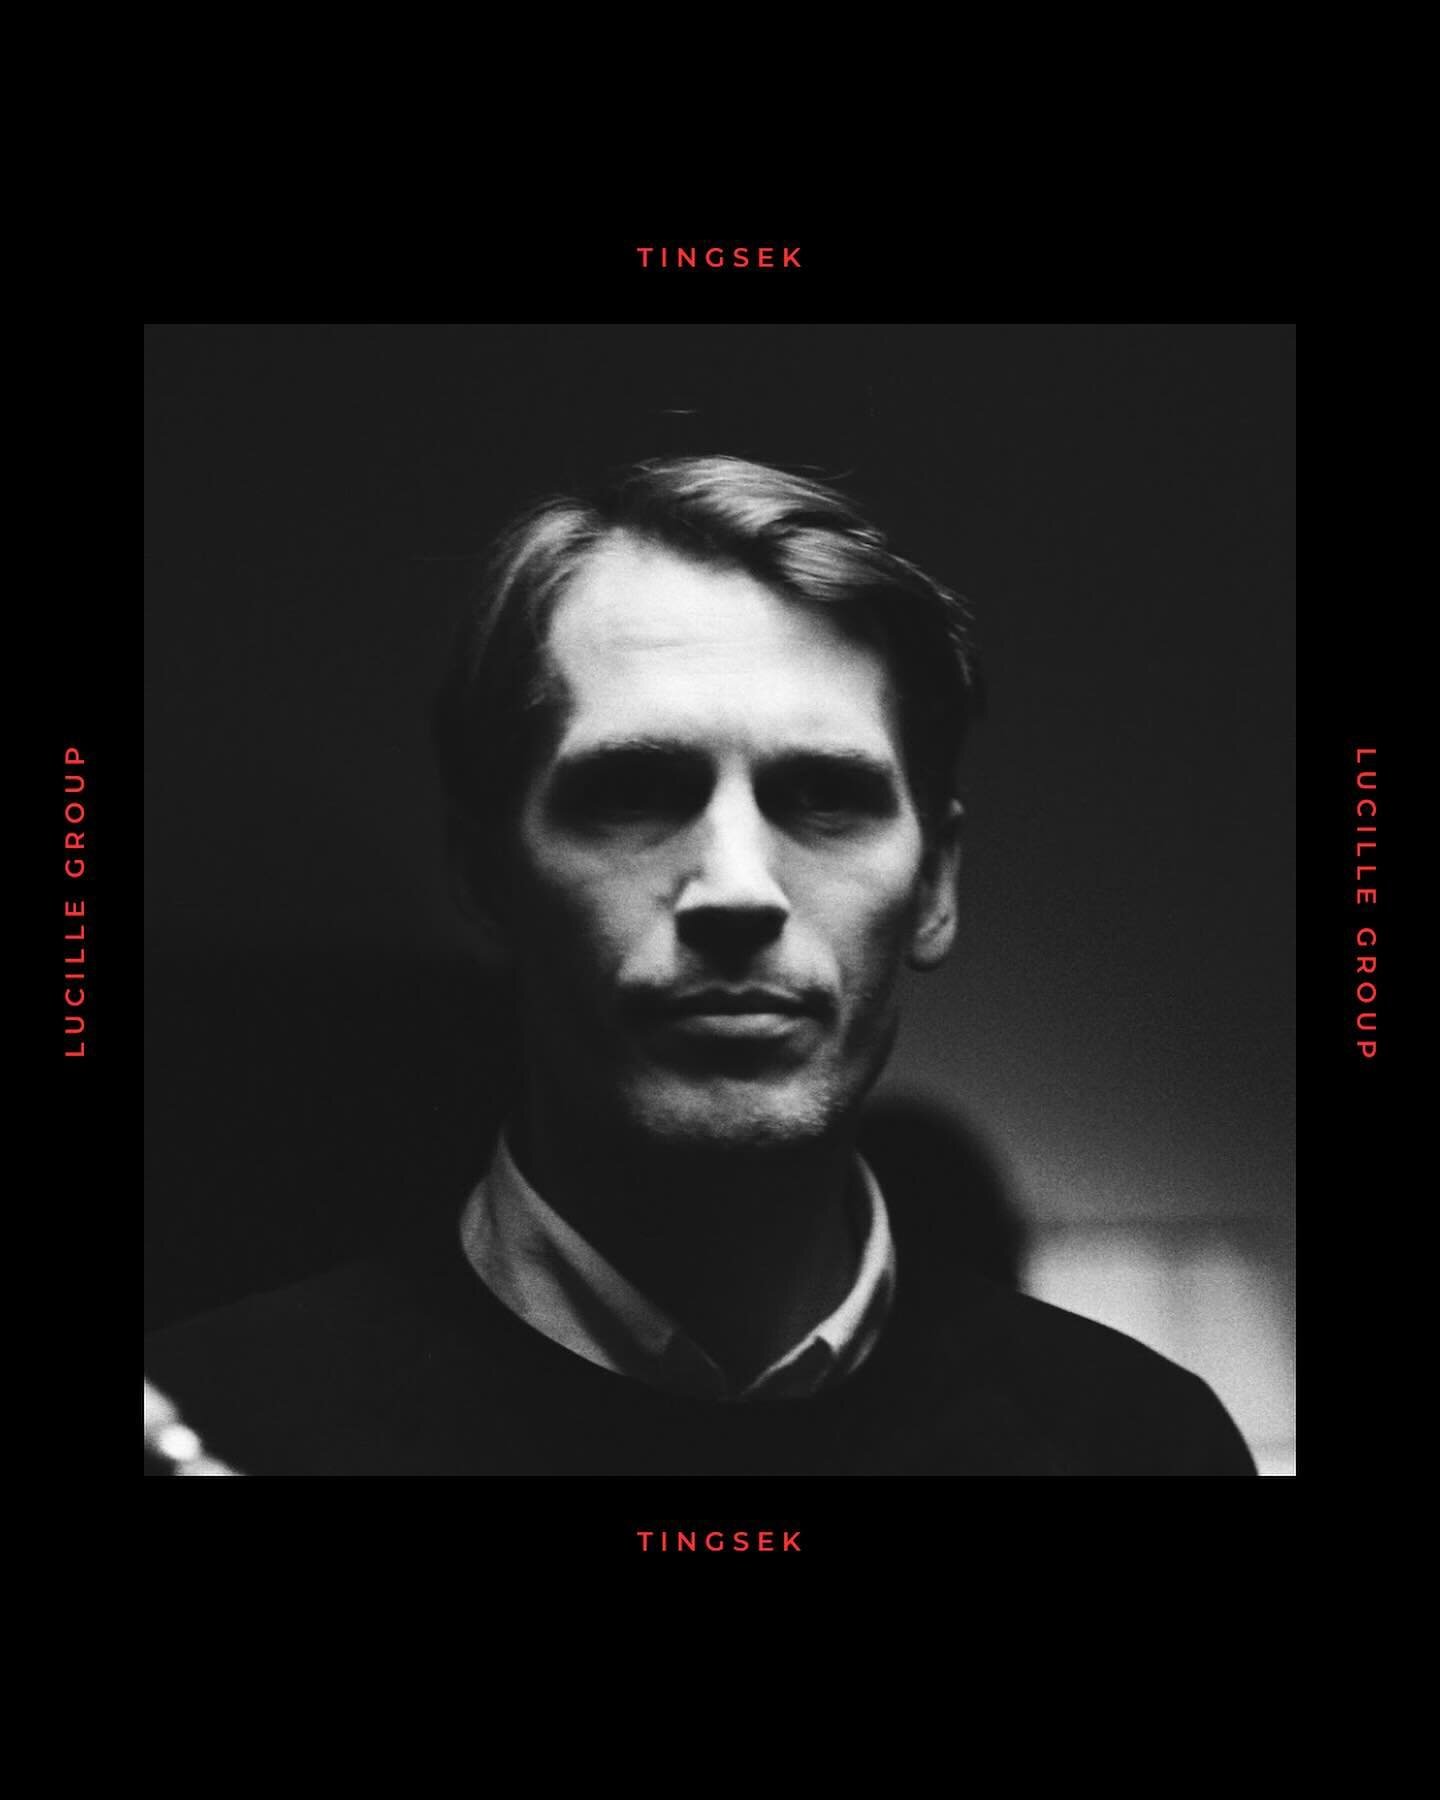 We might be longing for warm summer days in this cold and snowy weather, but with the drop that Tingsek finally provided us with today, all we can think about is &ldquo;October&rdquo;!&nbsp;

Tingsek&rsquo;s breakthrough came with the release of his 